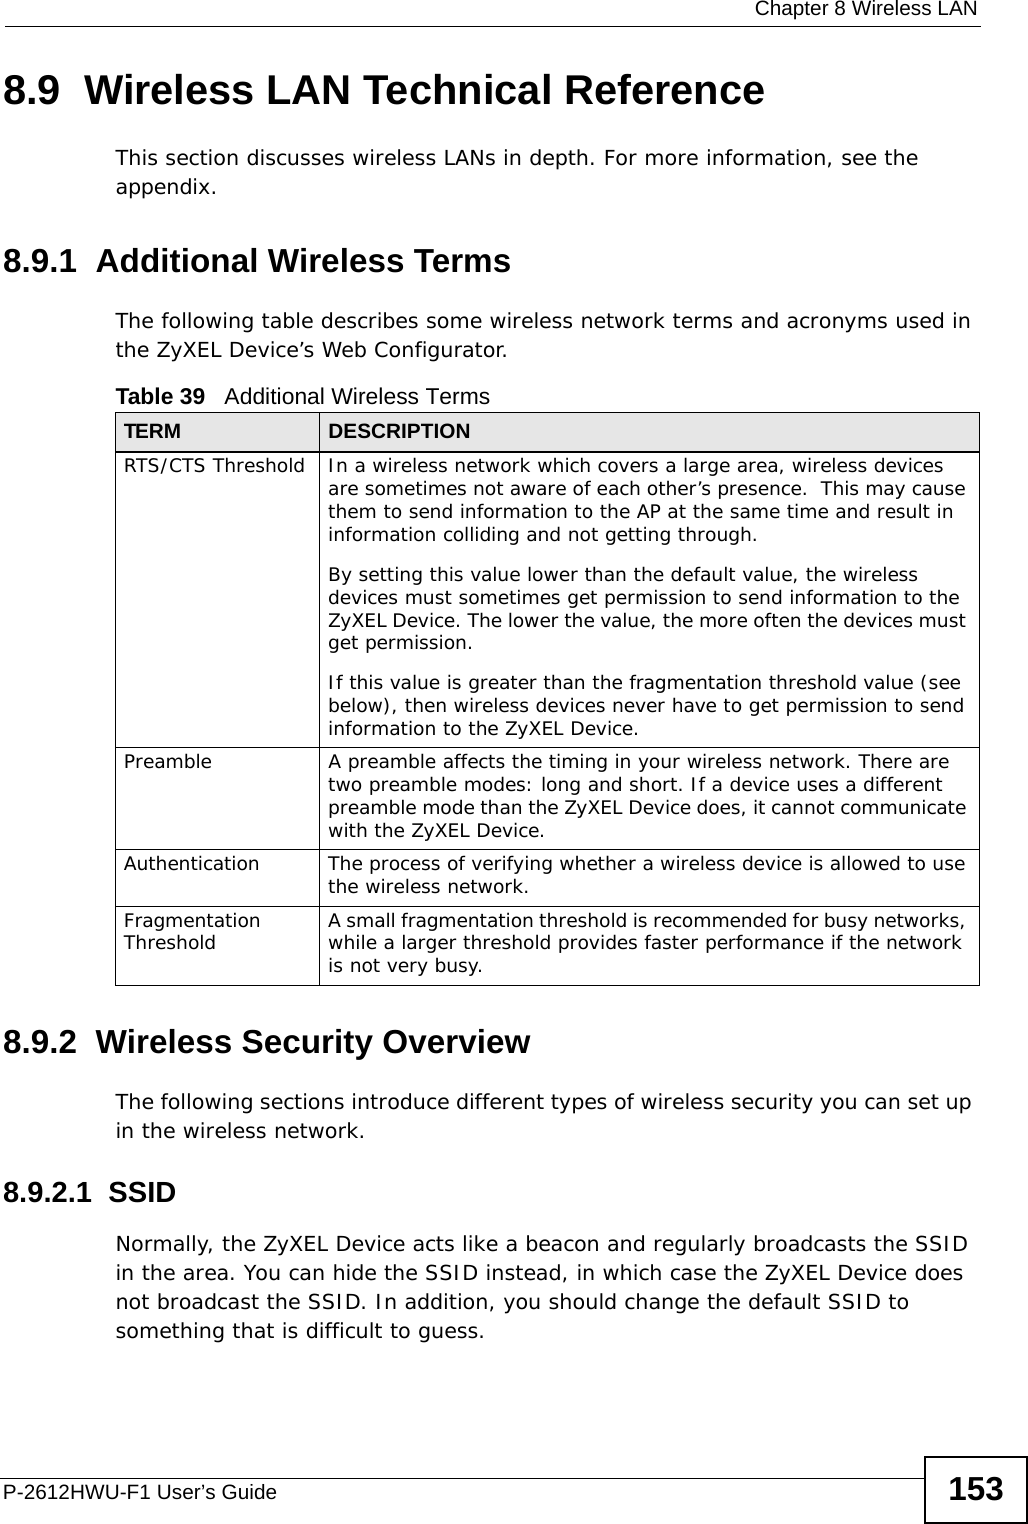  Chapter 8 Wireless LANP-2612HWU-F1 User’s Guide 1538.9  Wireless LAN Technical ReferenceThis section discusses wireless LANs in depth. For more information, see the appendix.8.9.1  Additional Wireless TermsThe following table describes some wireless network terms and acronyms used in the ZyXEL Device’s Web Configurator.8.9.2  Wireless Security OverviewThe following sections introduce different types of wireless security you can set up in the wireless network.8.9.2.1  SSIDNormally, the ZyXEL Device acts like a beacon and regularly broadcasts the SSID in the area. You can hide the SSID instead, in which case the ZyXEL Device does not broadcast the SSID. In addition, you should change the default SSID to something that is difficult to guess.Table 39   Additional Wireless TermsTERM DESCRIPTIONRTS/CTS Threshold In a wireless network which covers a large area, wireless devices are sometimes not aware of each other’s presence.  This may cause them to send information to the AP at the same time and result in information colliding and not getting through.By setting this value lower than the default value, the wireless devices must sometimes get permission to send information to the ZyXEL Device. The lower the value, the more often the devices must get permission.If this value is greater than the fragmentation threshold value (see below), then wireless devices never have to get permission to send information to the ZyXEL Device.Preamble A preamble affects the timing in your wireless network. There are two preamble modes: long and short. If a device uses a different preamble mode than the ZyXEL Device does, it cannot communicate with the ZyXEL Device.Authentication The process of verifying whether a wireless device is allowed to use the wireless network.Fragmentation Threshold A small fragmentation threshold is recommended for busy networks, while a larger threshold provides faster performance if the network is not very busy.